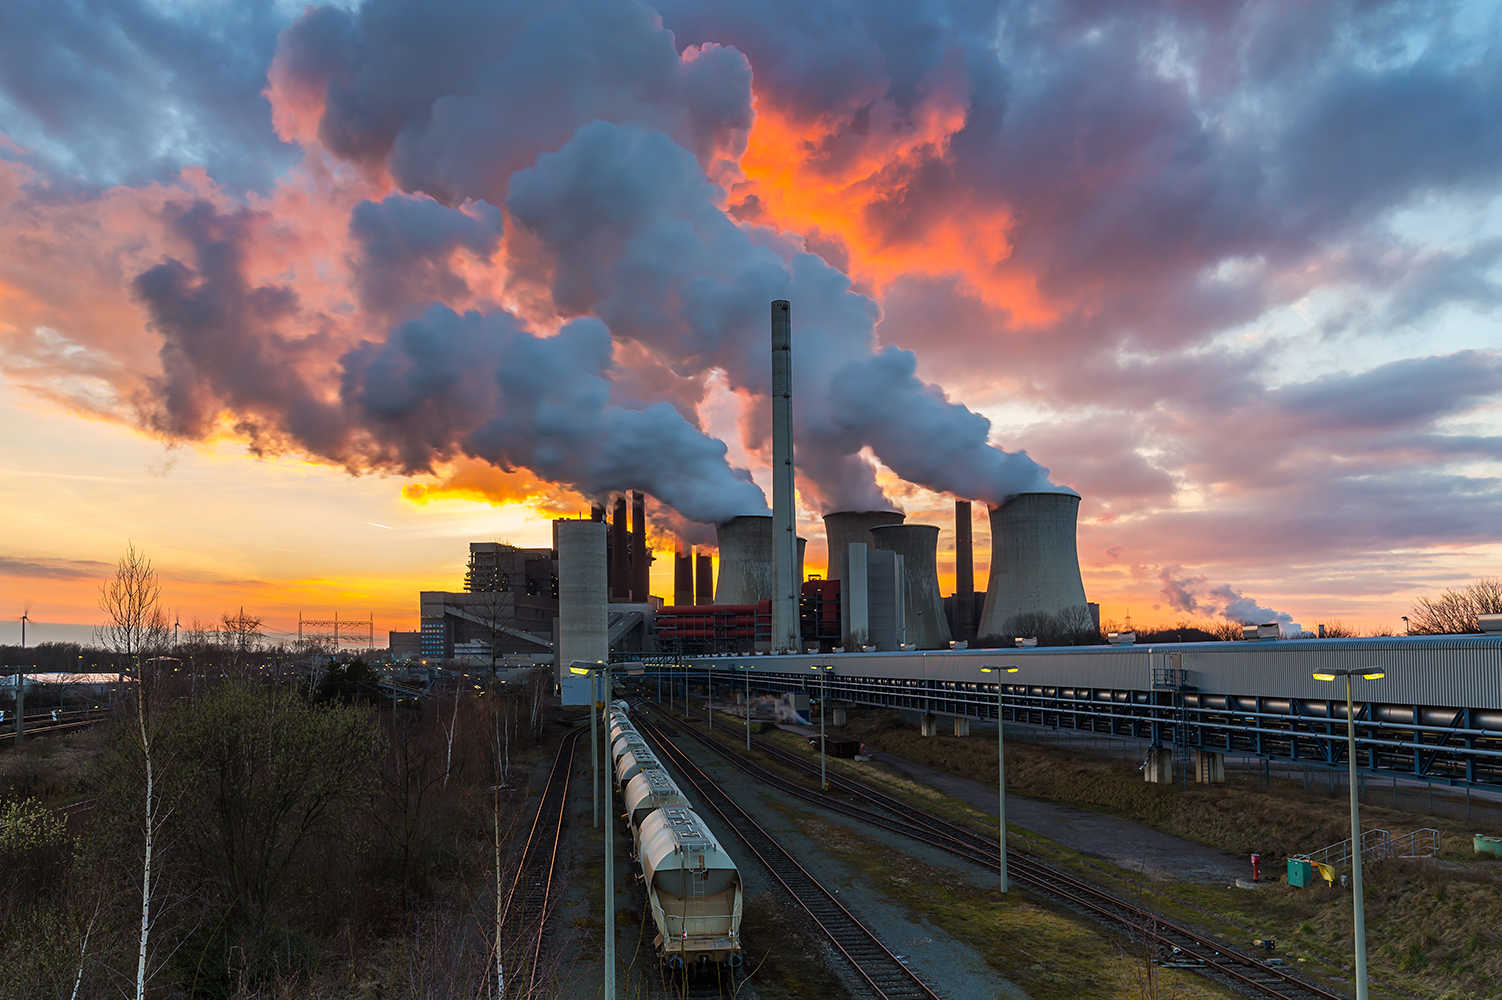 Lignite Power Plant at sunset with cloudy sky in Neurath, Germany.